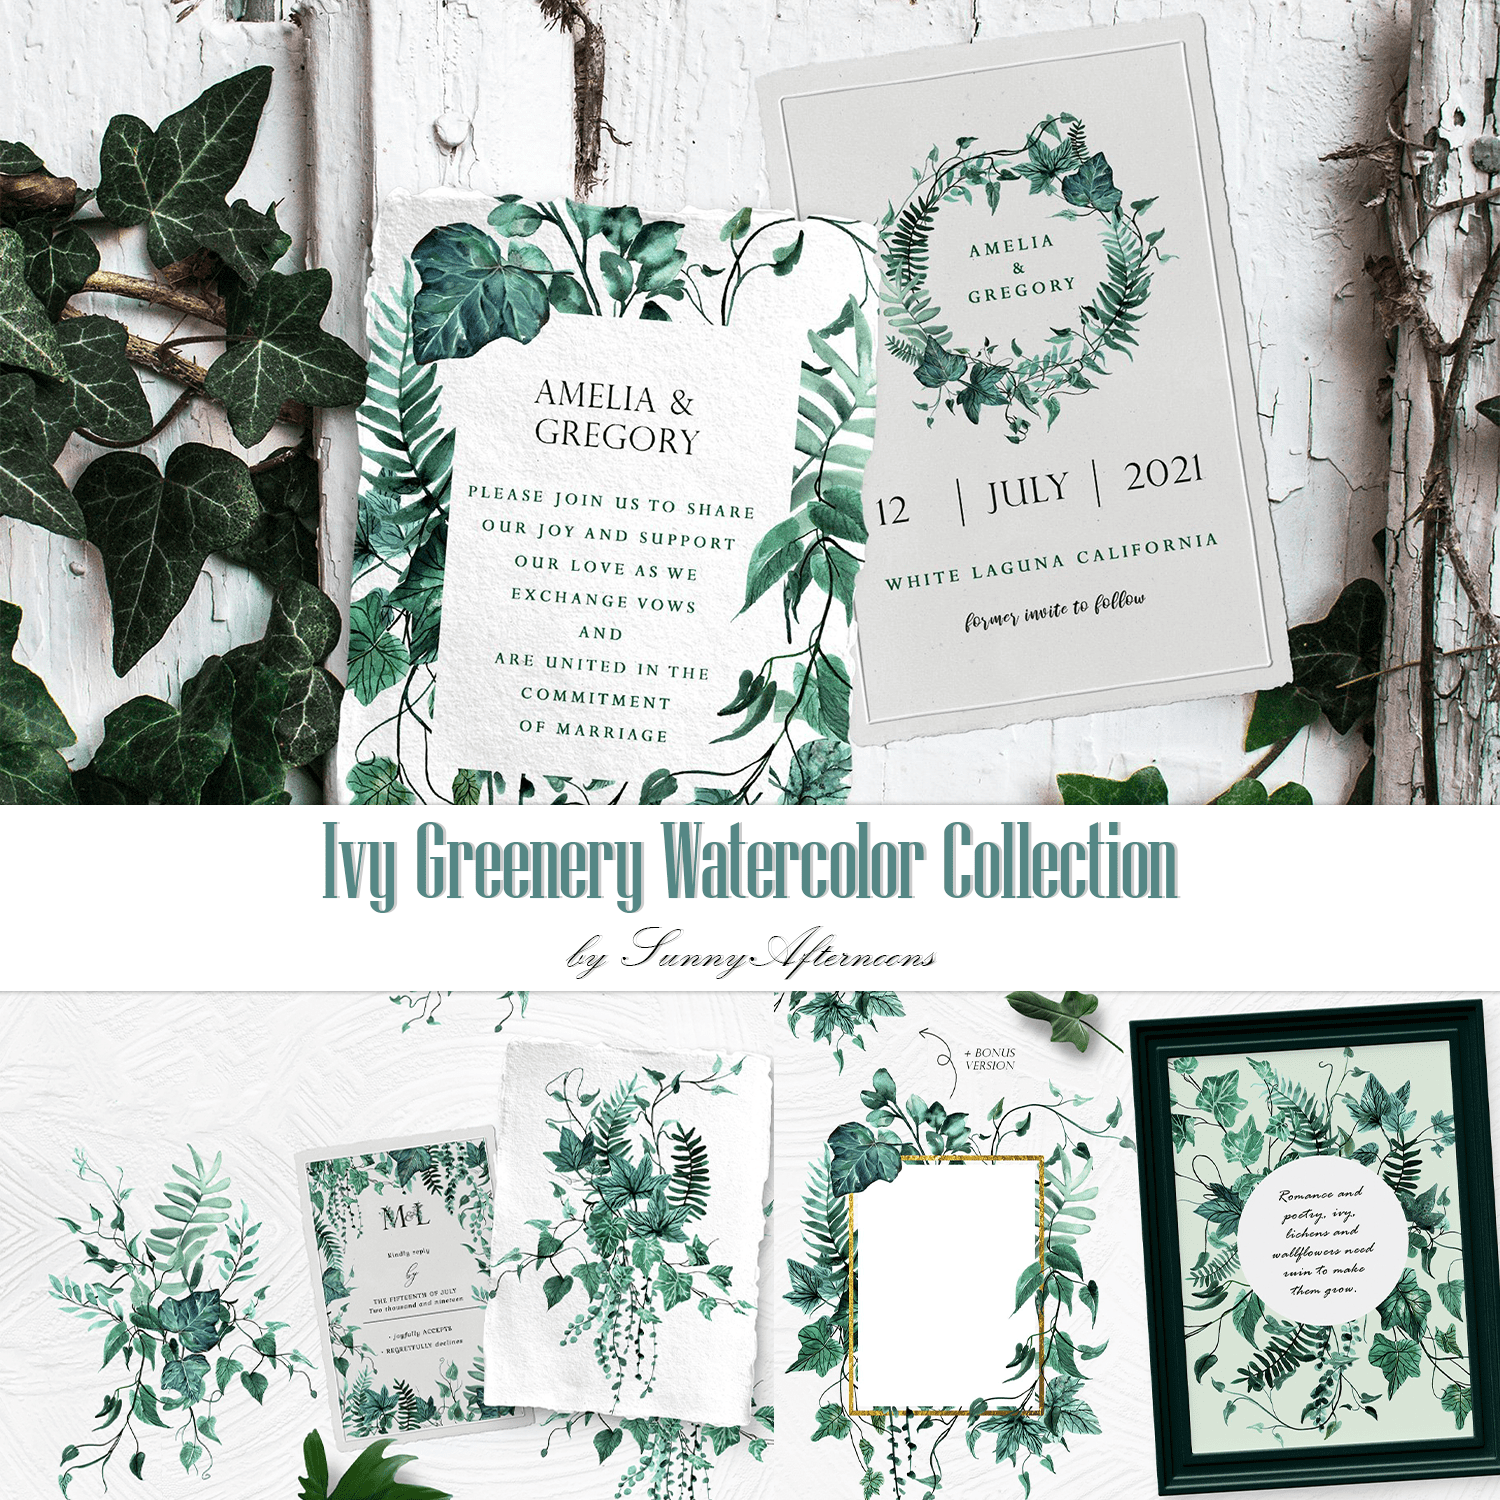 Ivy Greenery Watercolor Collection cover.